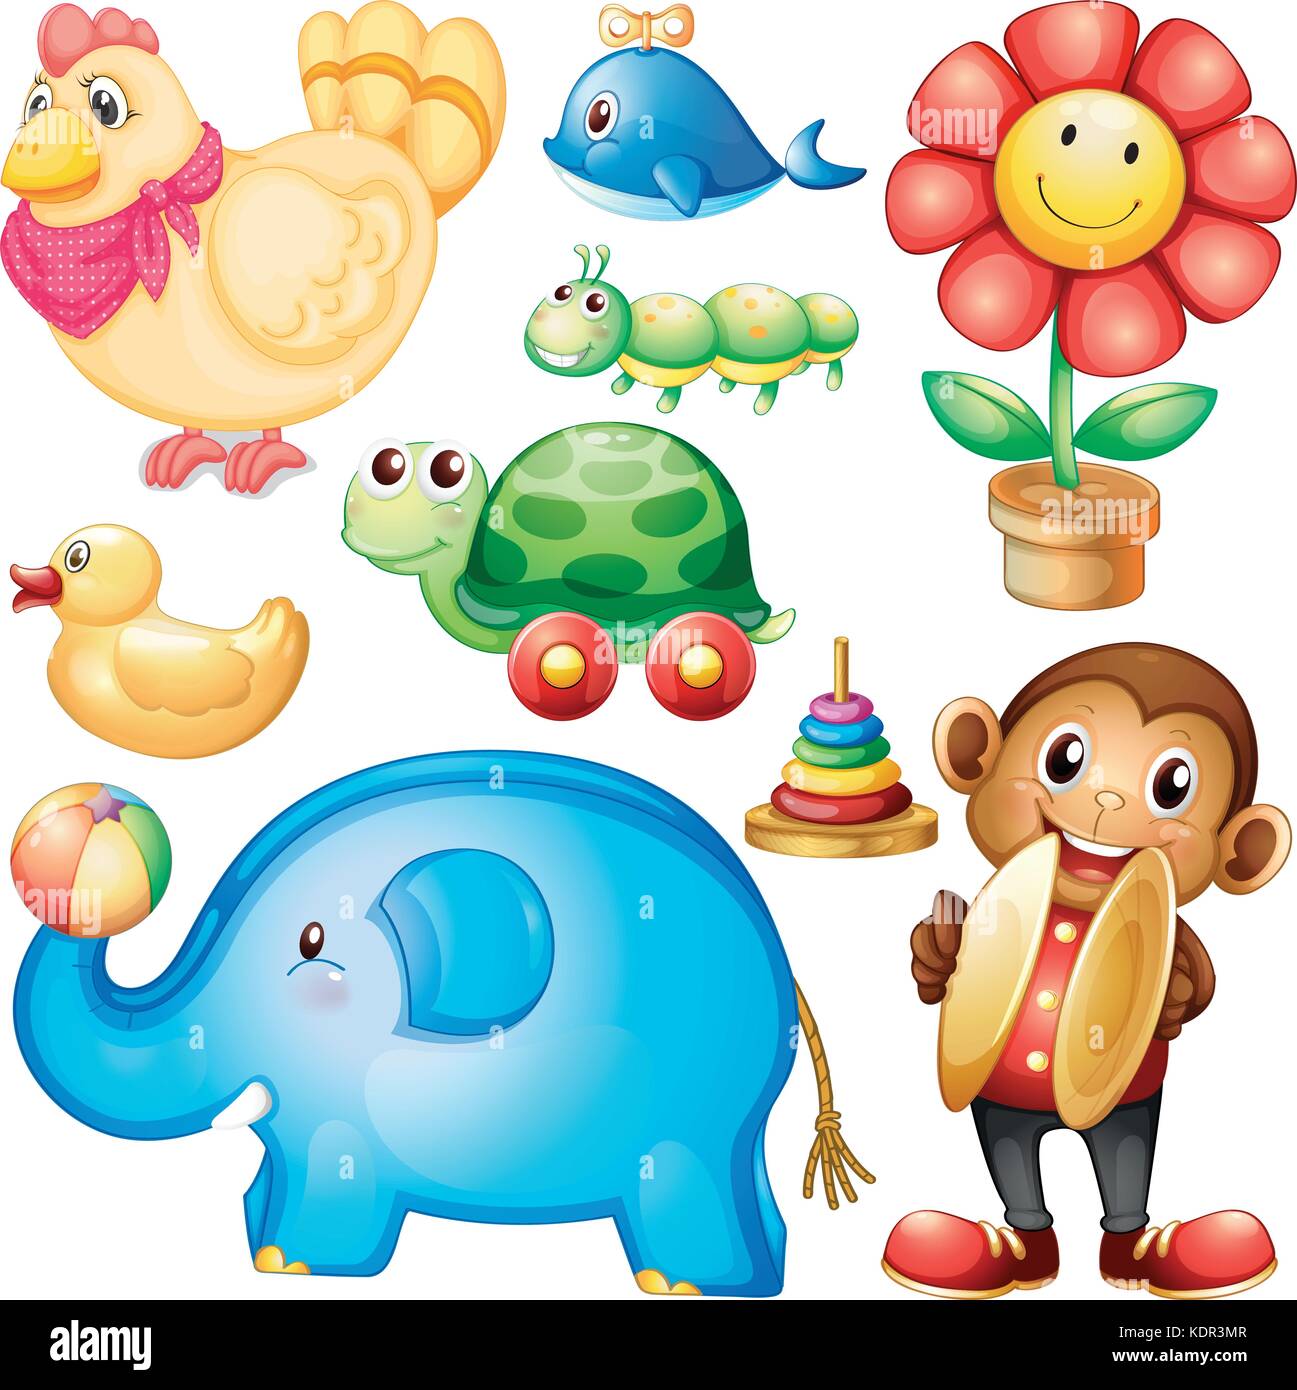 Different designs of toys illustration Stock Vector